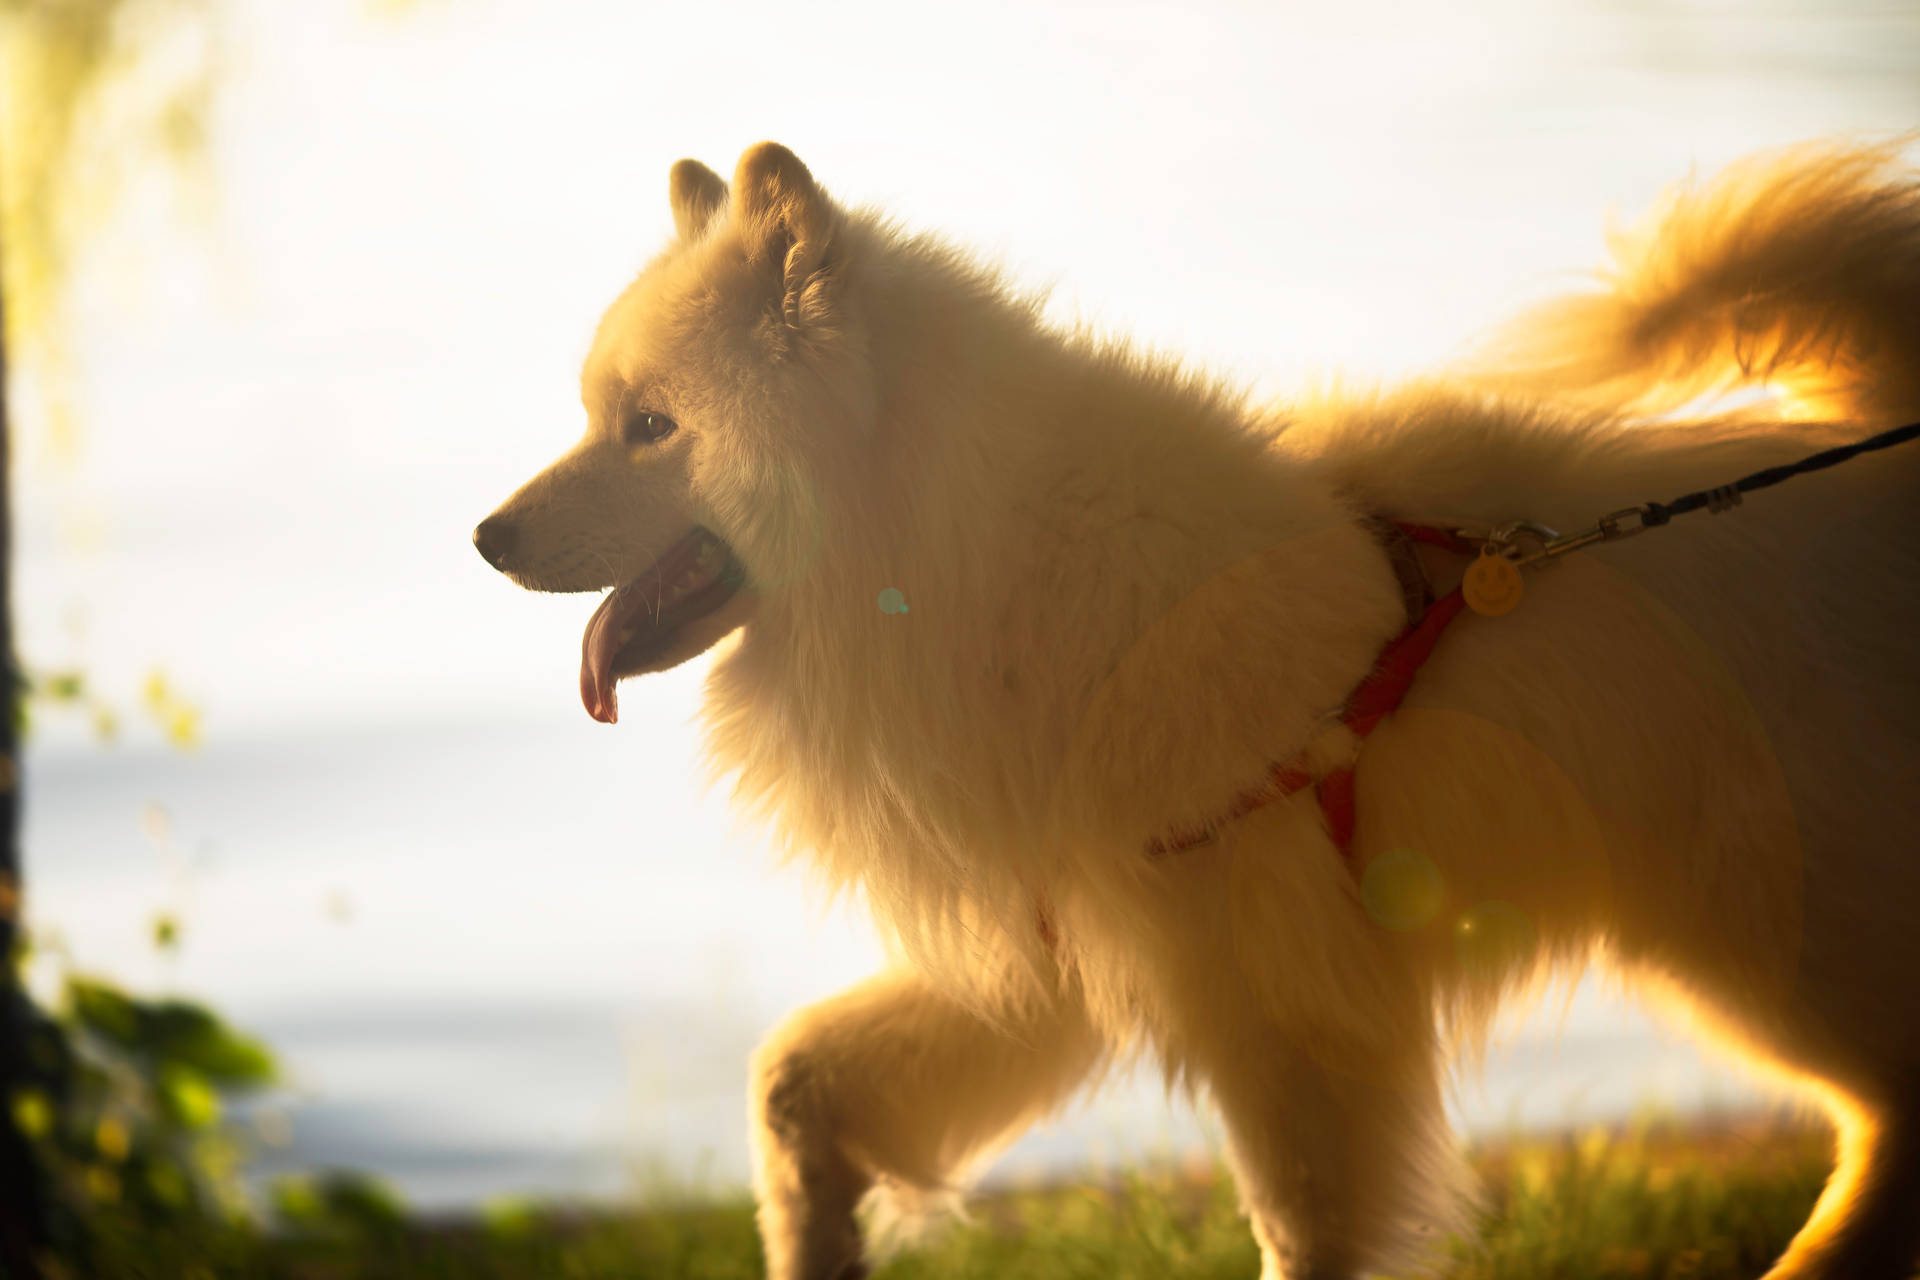 "A Japanese Spitz dog playing with a tennis ball in Japan." Wallpaper